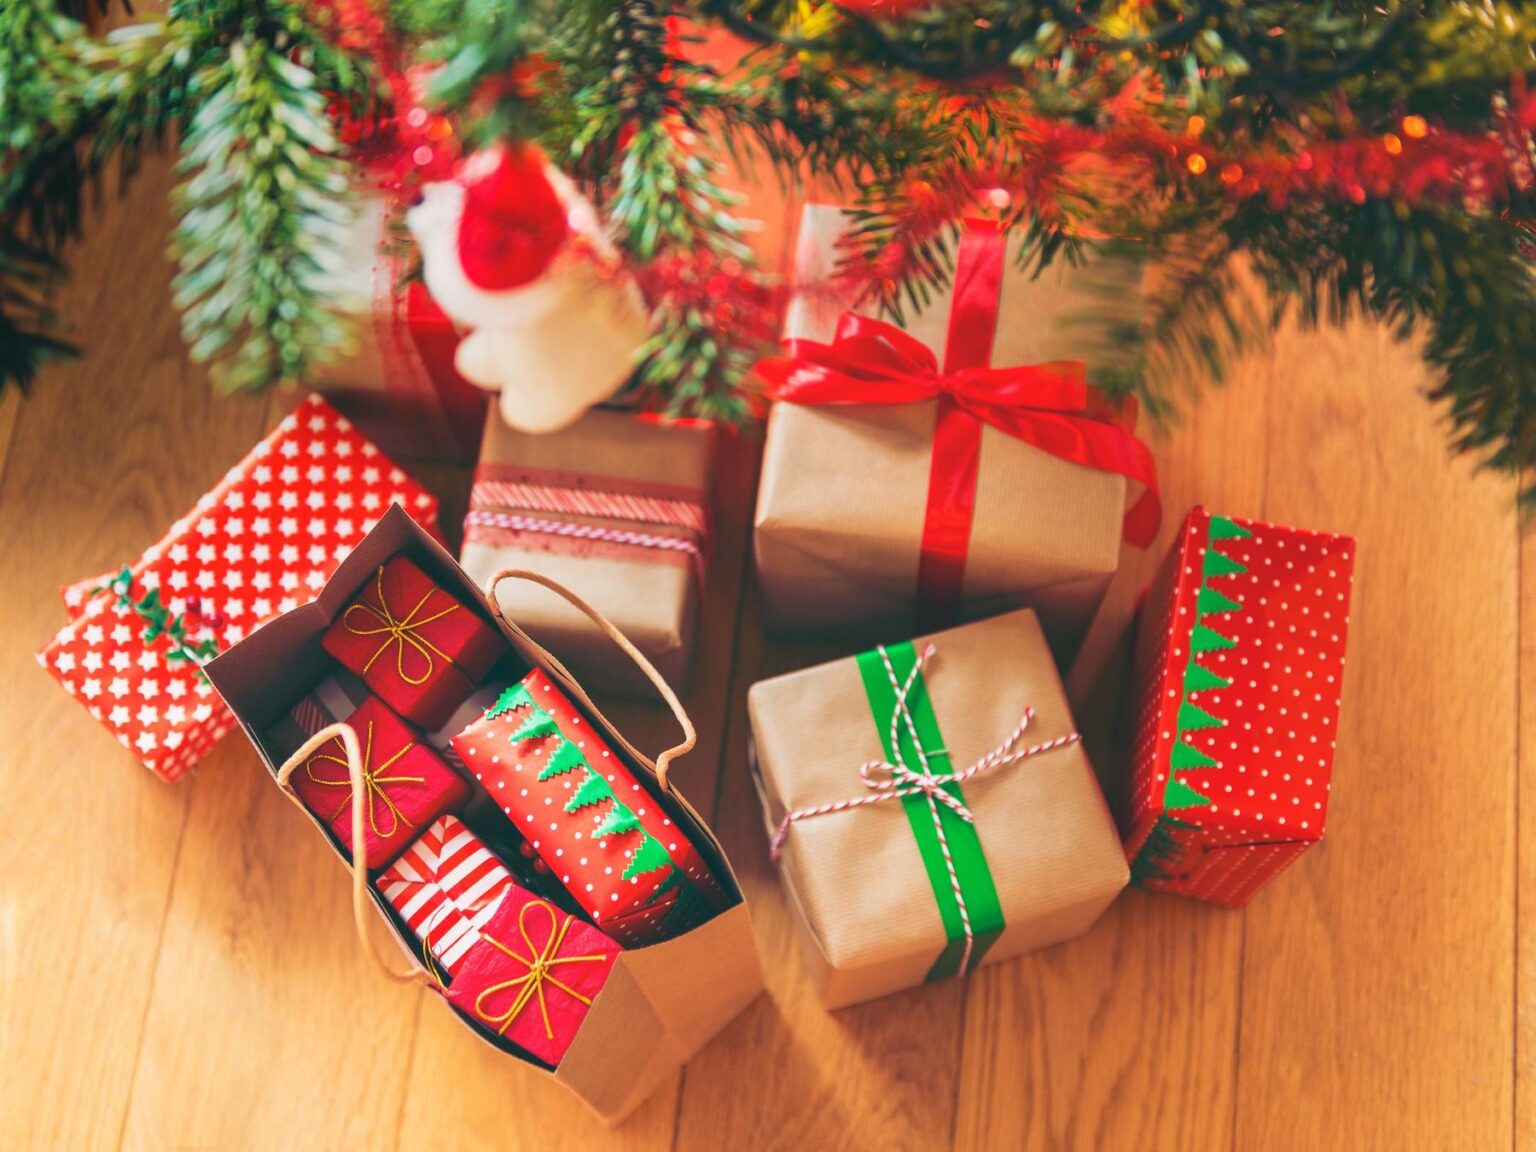 It's almost time to start thinking about buying Christmas presents for that special someone in your life. Get a head start with these fantastic gift ideas.